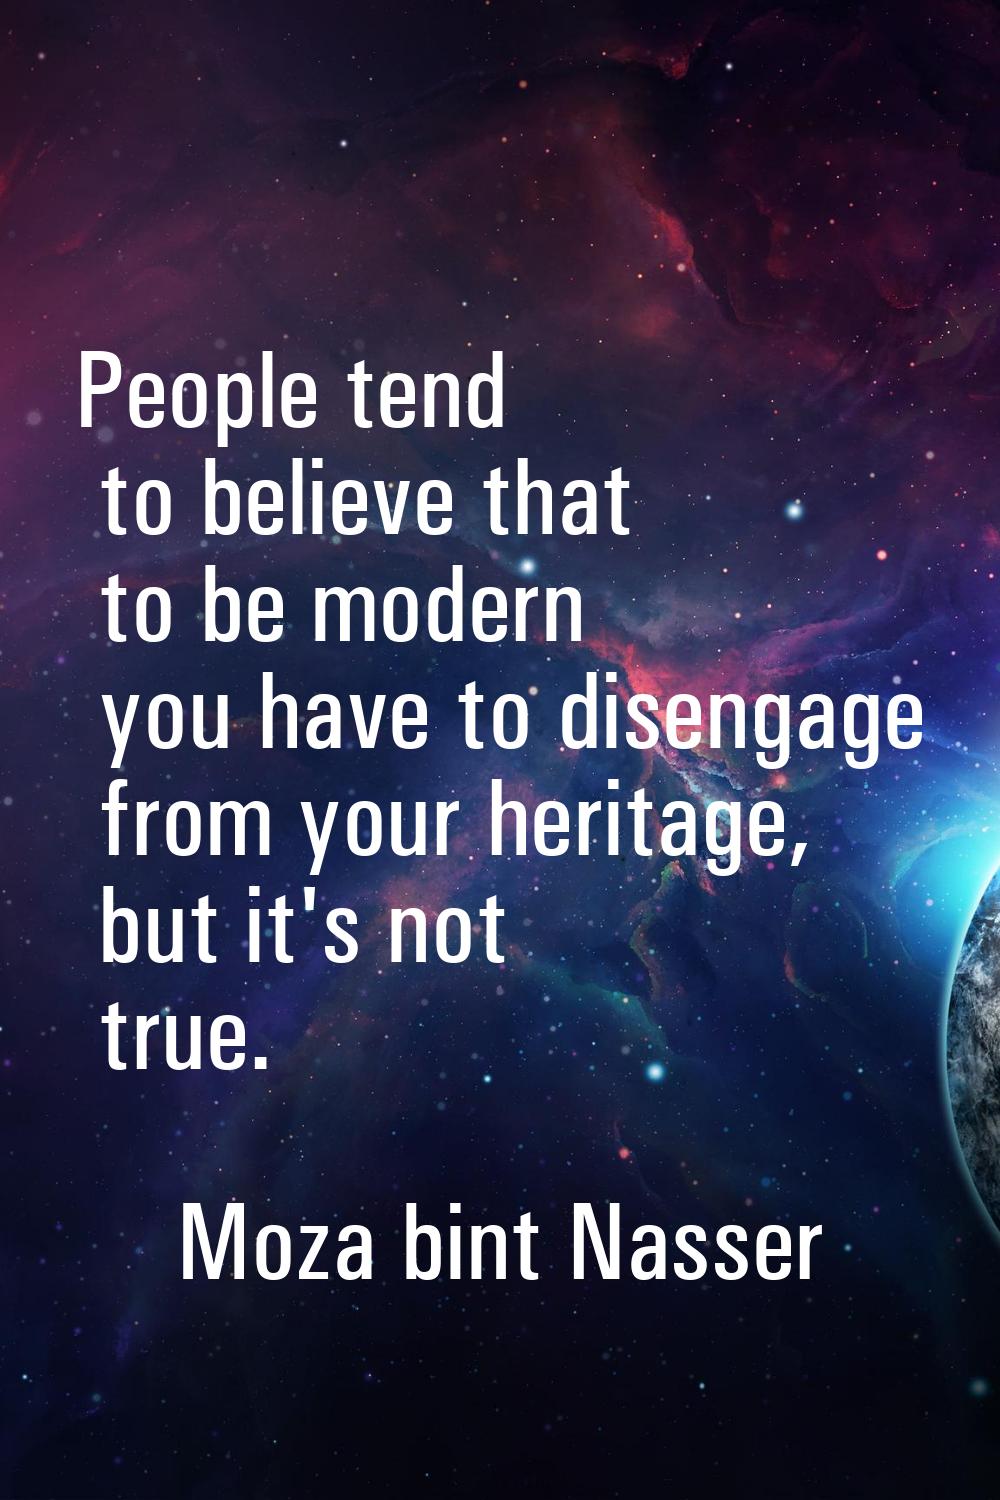 People tend to believe that to be modern you have to disengage from your heritage, but it's not tru